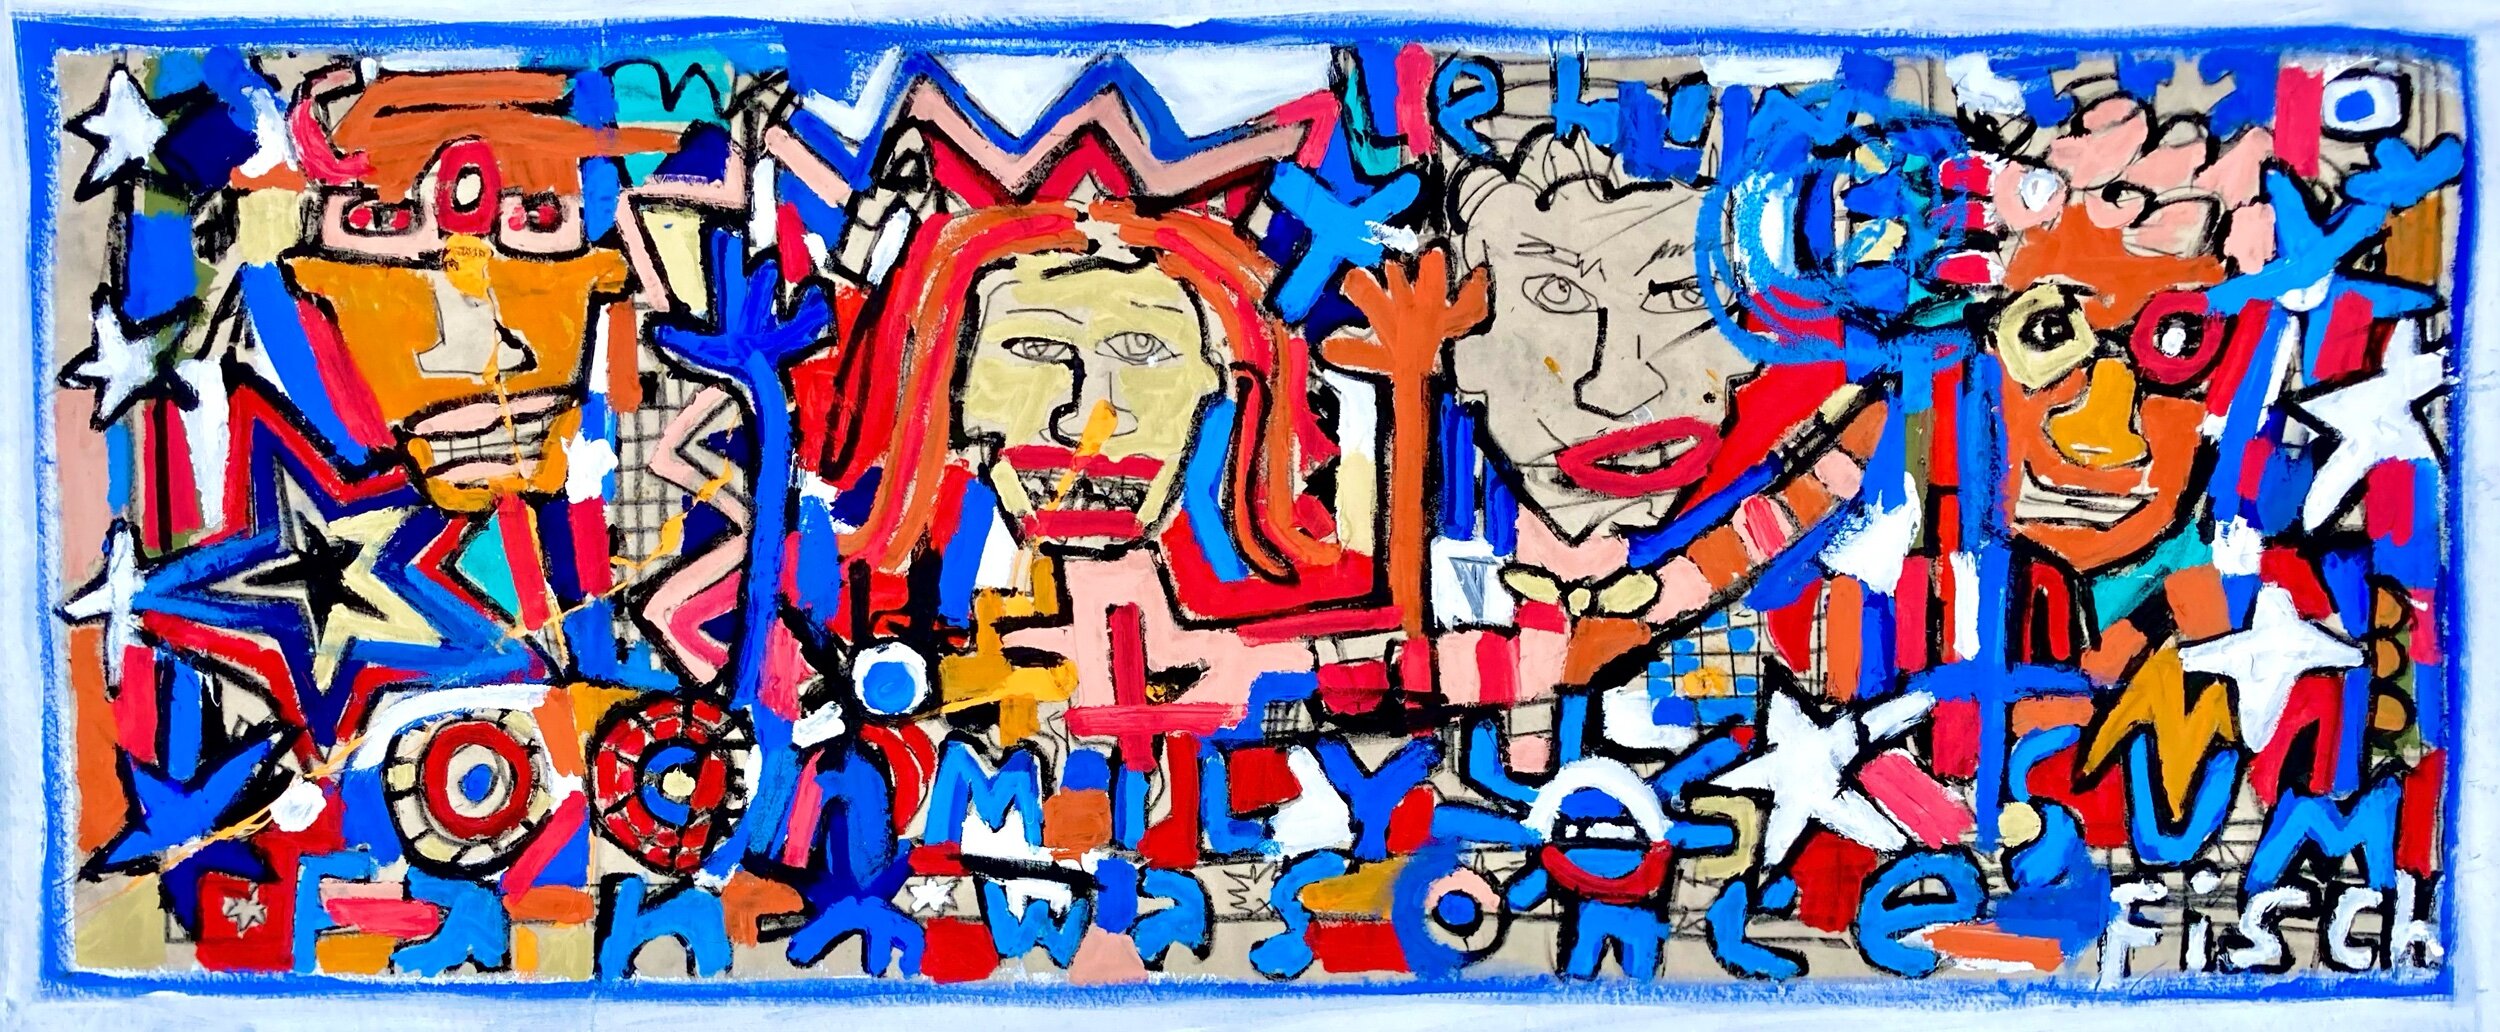 The Family, 26x63”